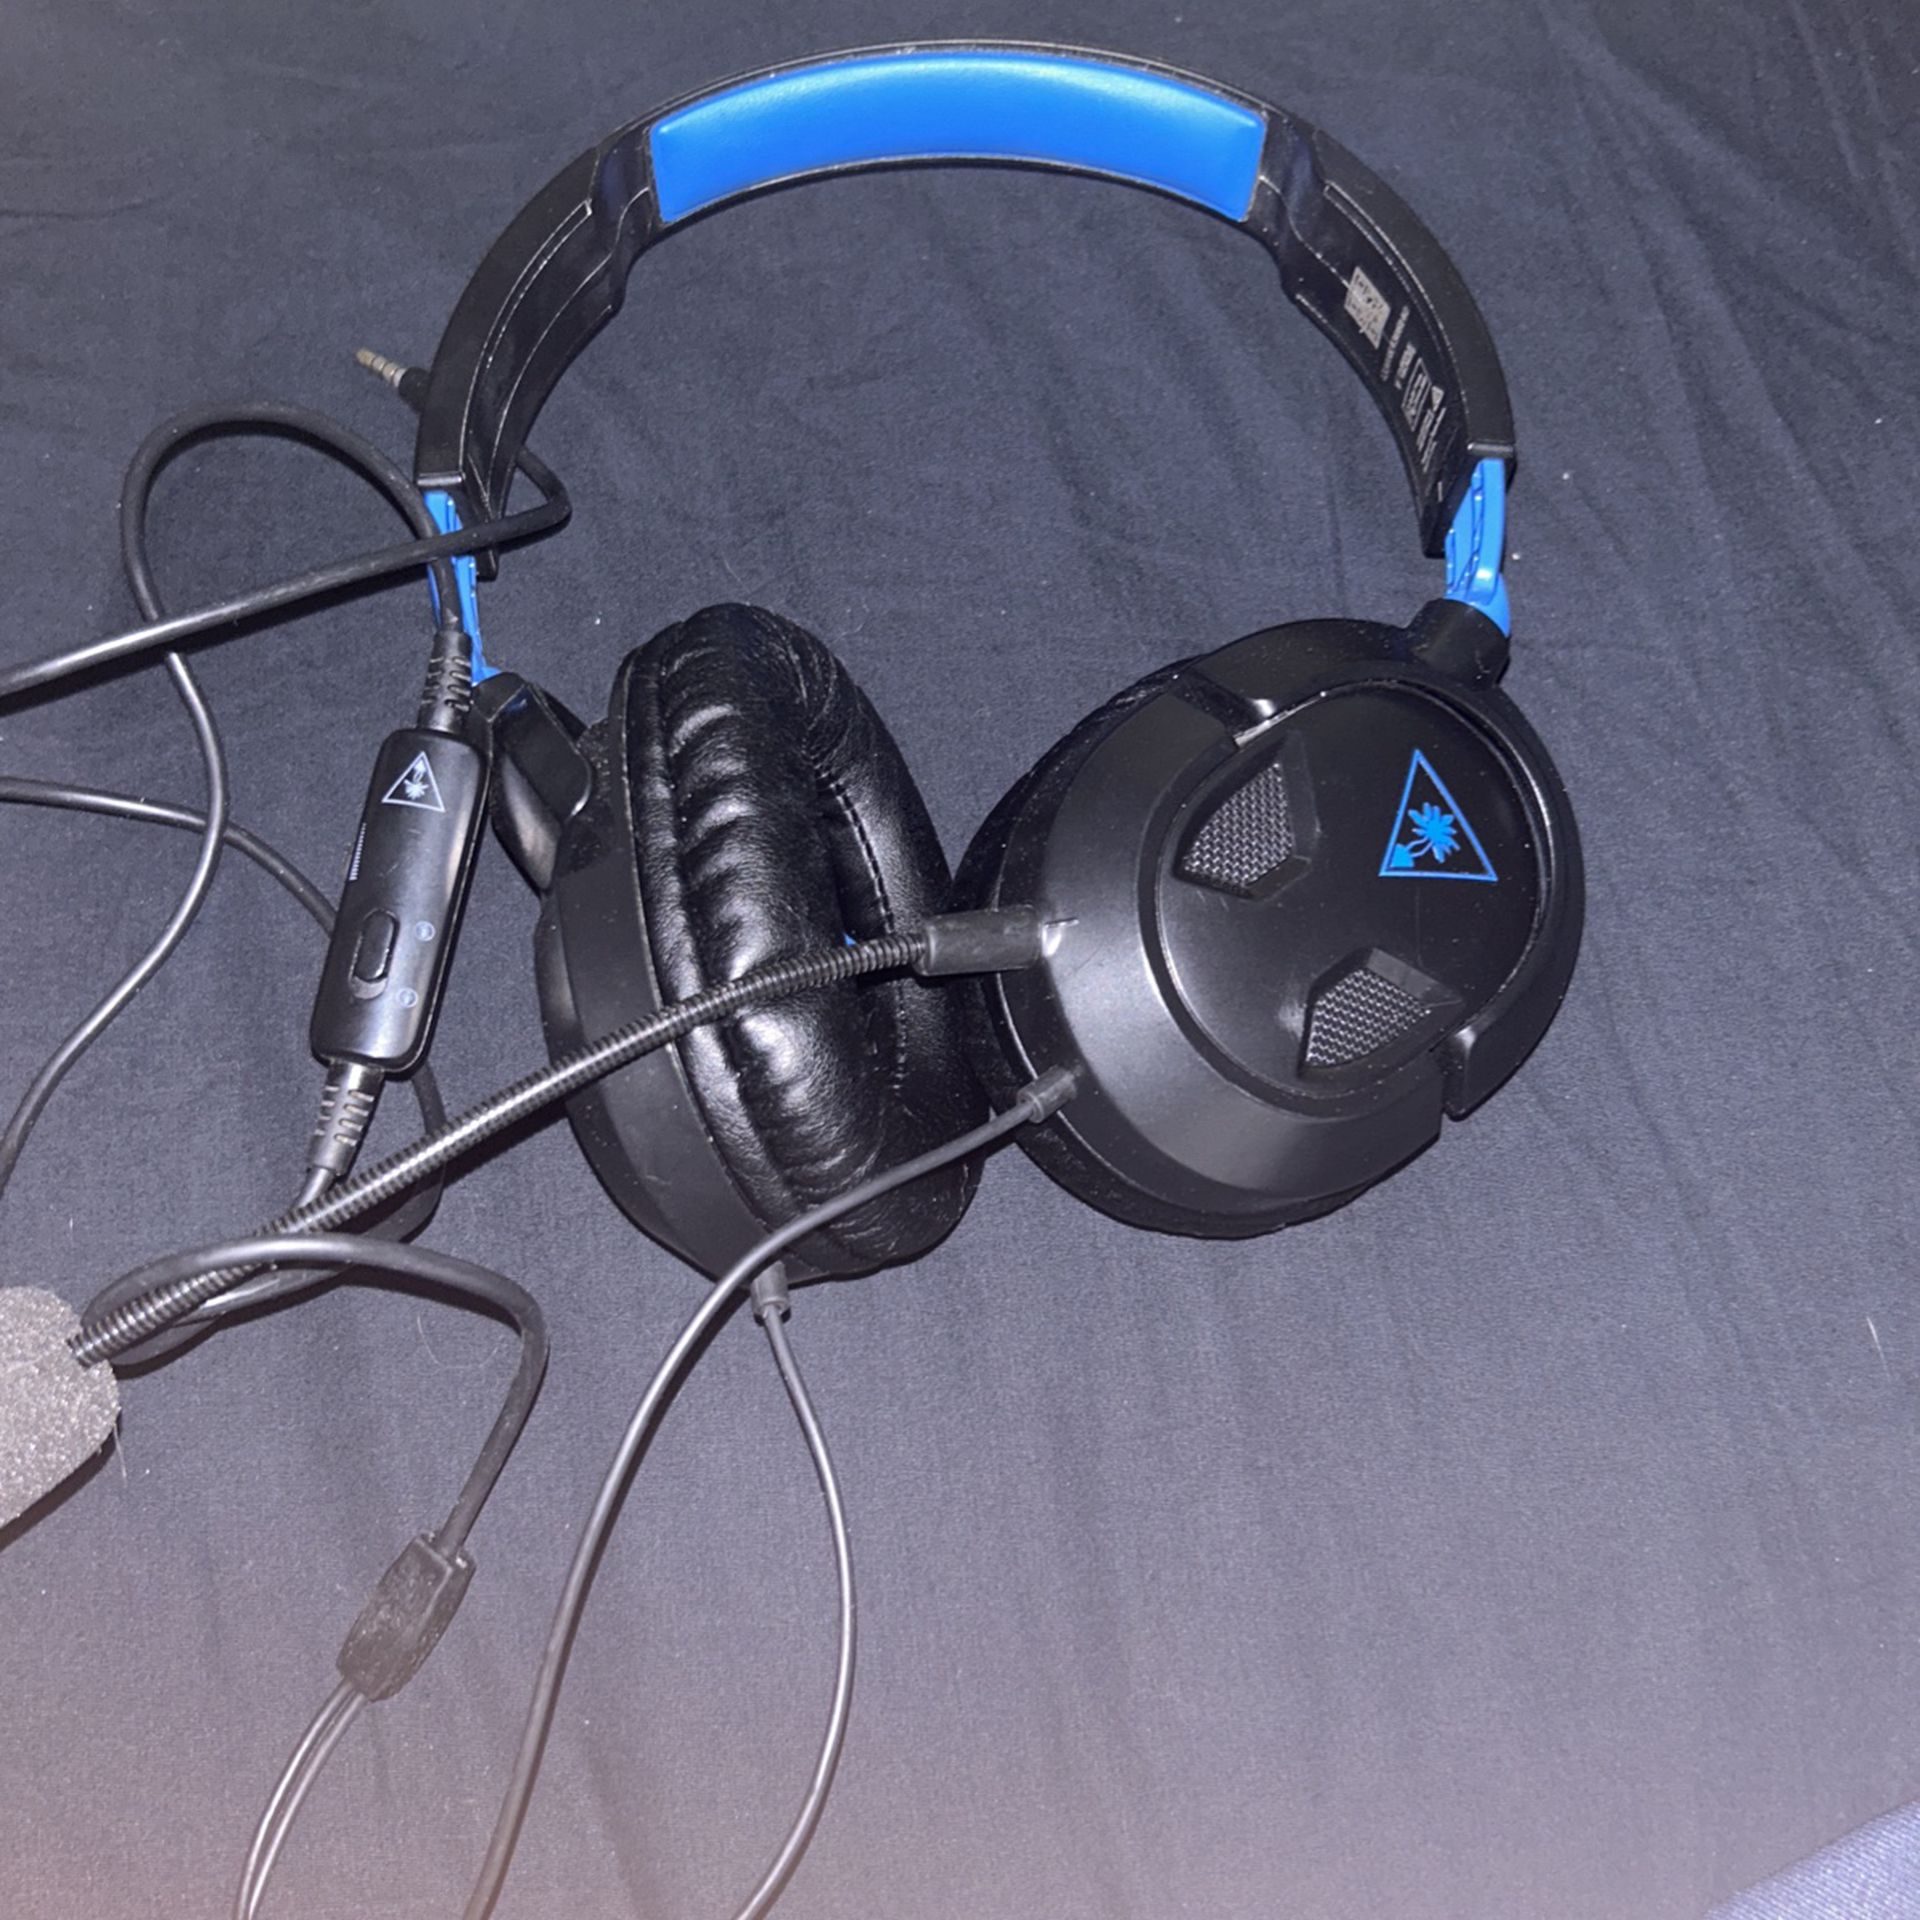 Wired Turtle Beach Headset